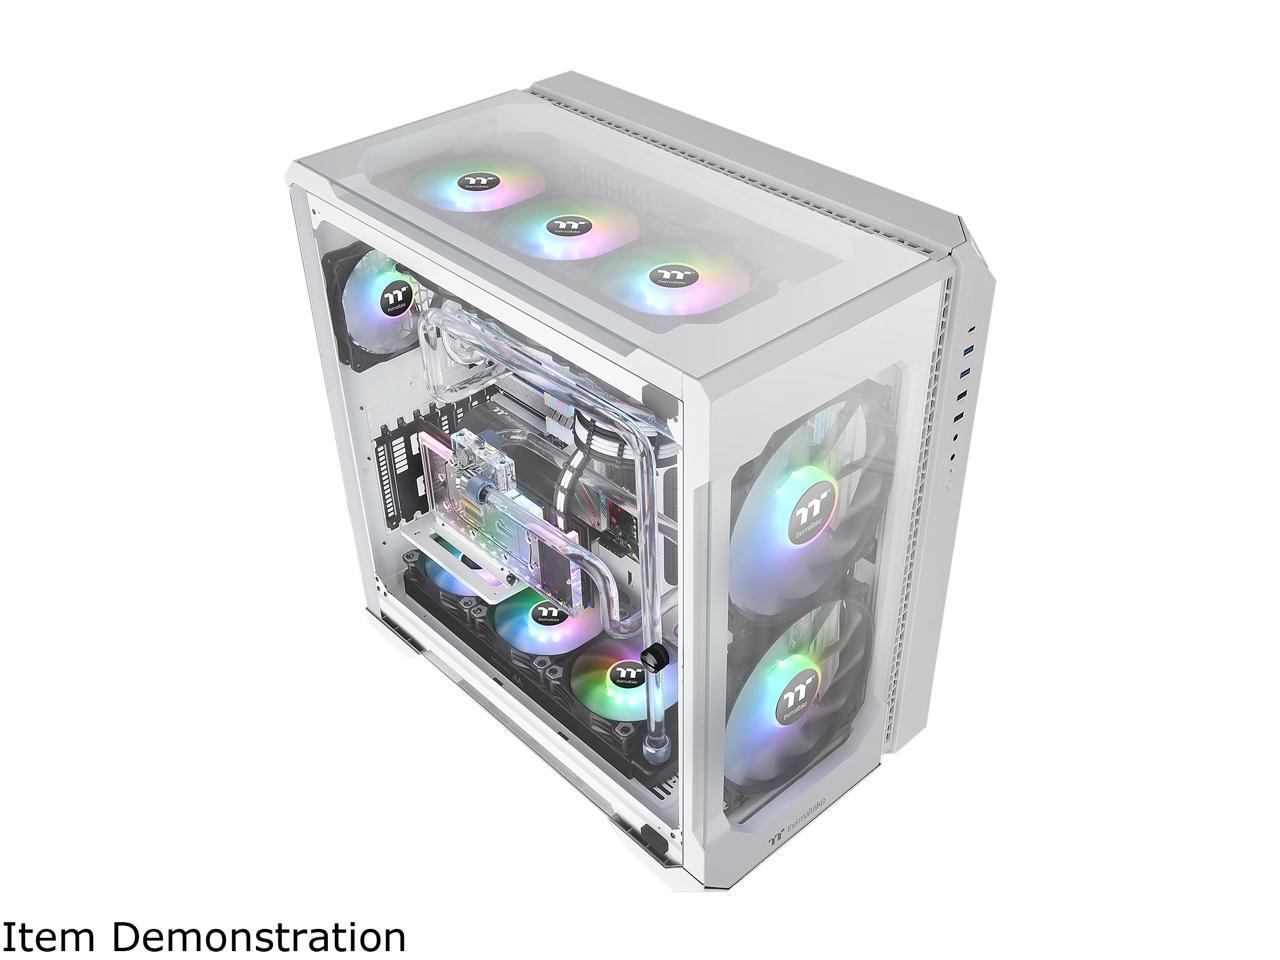 Thermaltake View 51 Snow Motherboard Sync ARGB E-ATX Full Tower Gaming Computer Case with 2 200mm ARGB 5V Motherboard Sync RGB Fans + 140mm Black Rear Fan Pre-Installed CA-1Q6-00M6WN-00